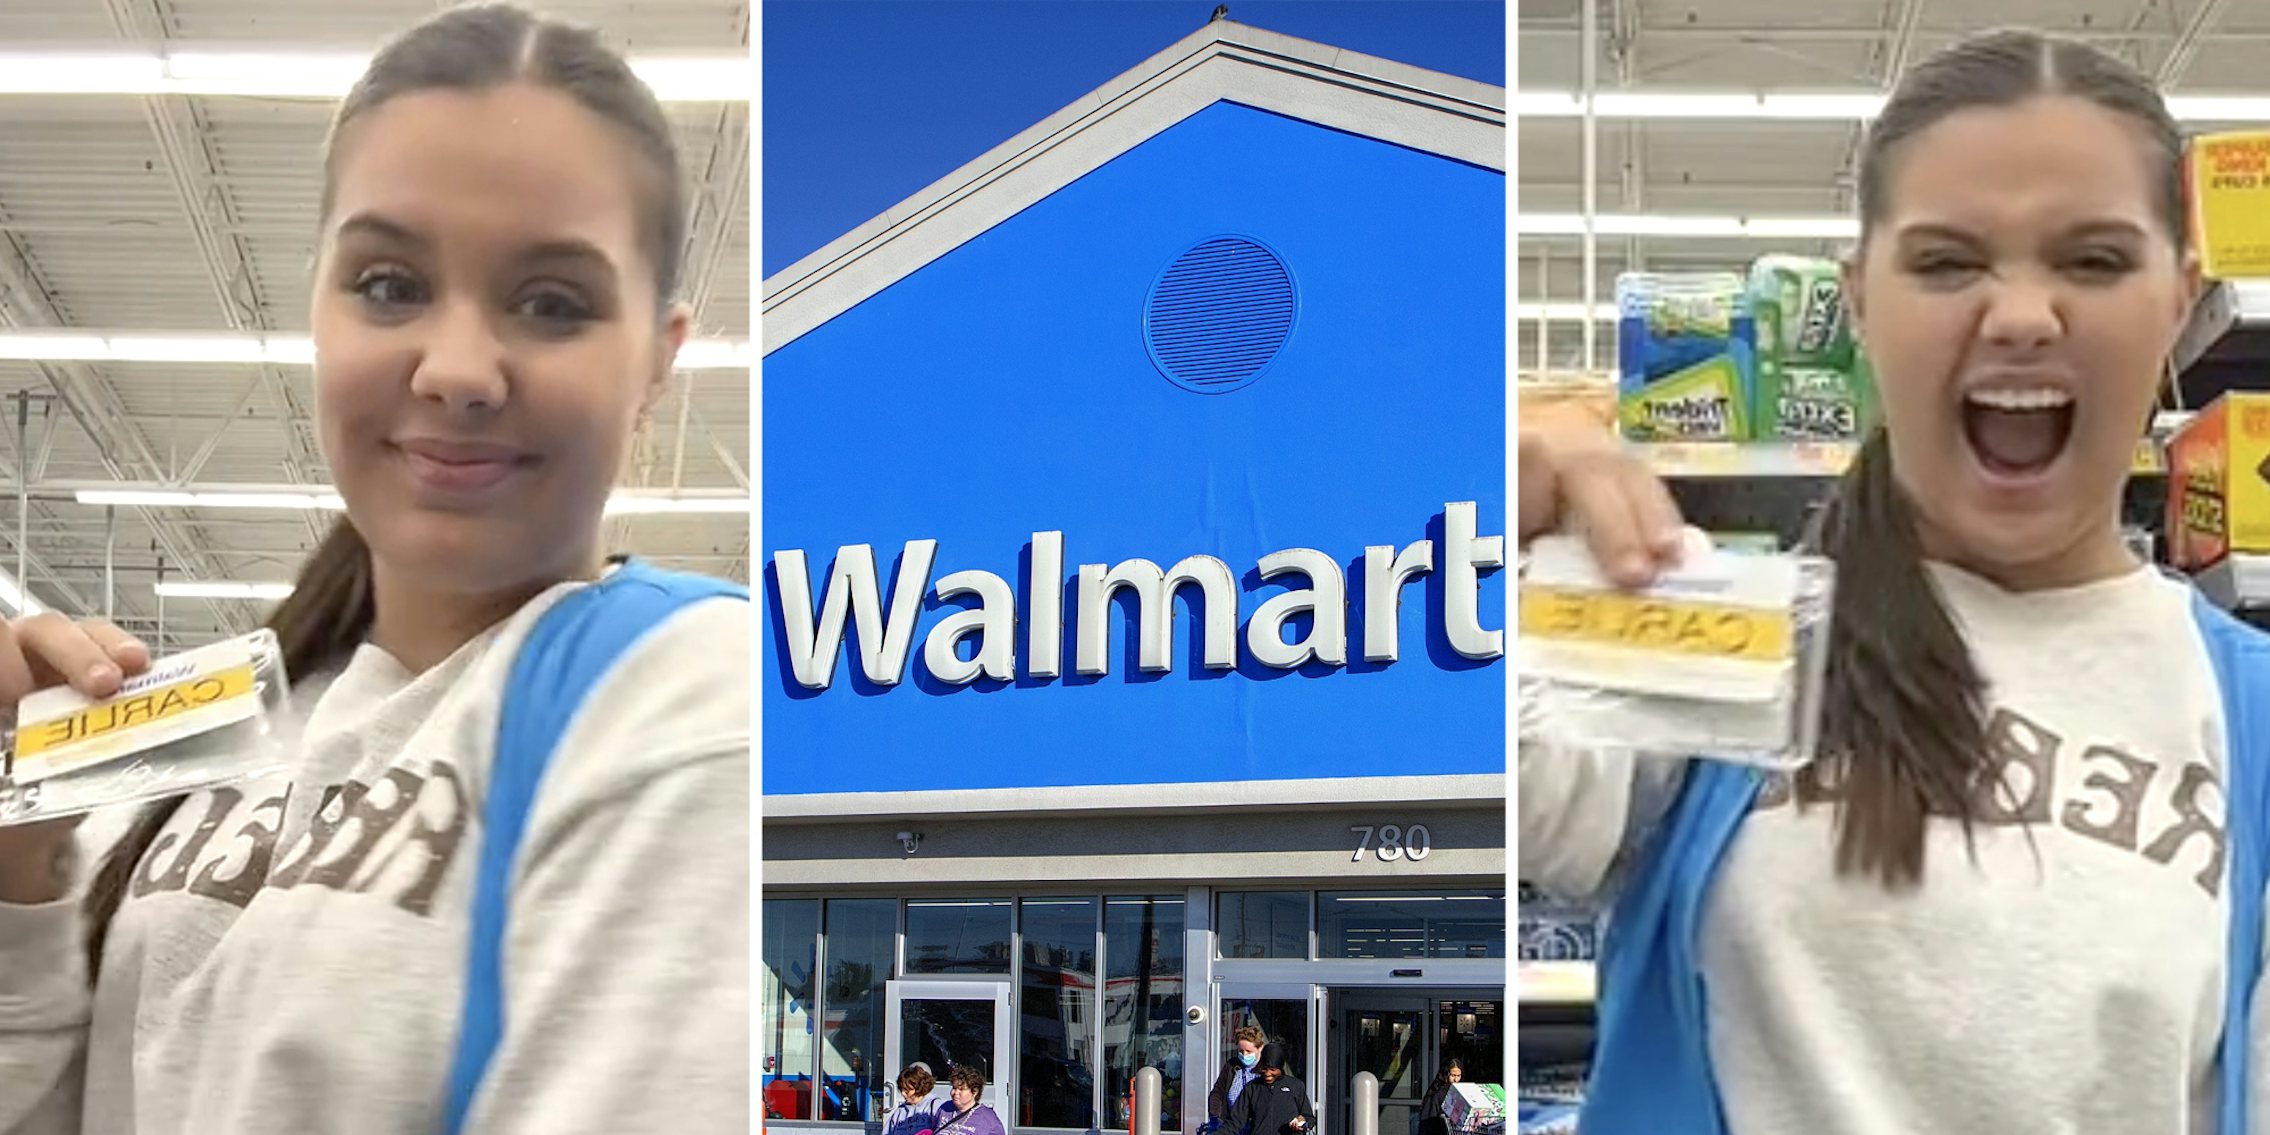 Walmart worker showing off yellow name tag(l+r), Walmart store front(c)